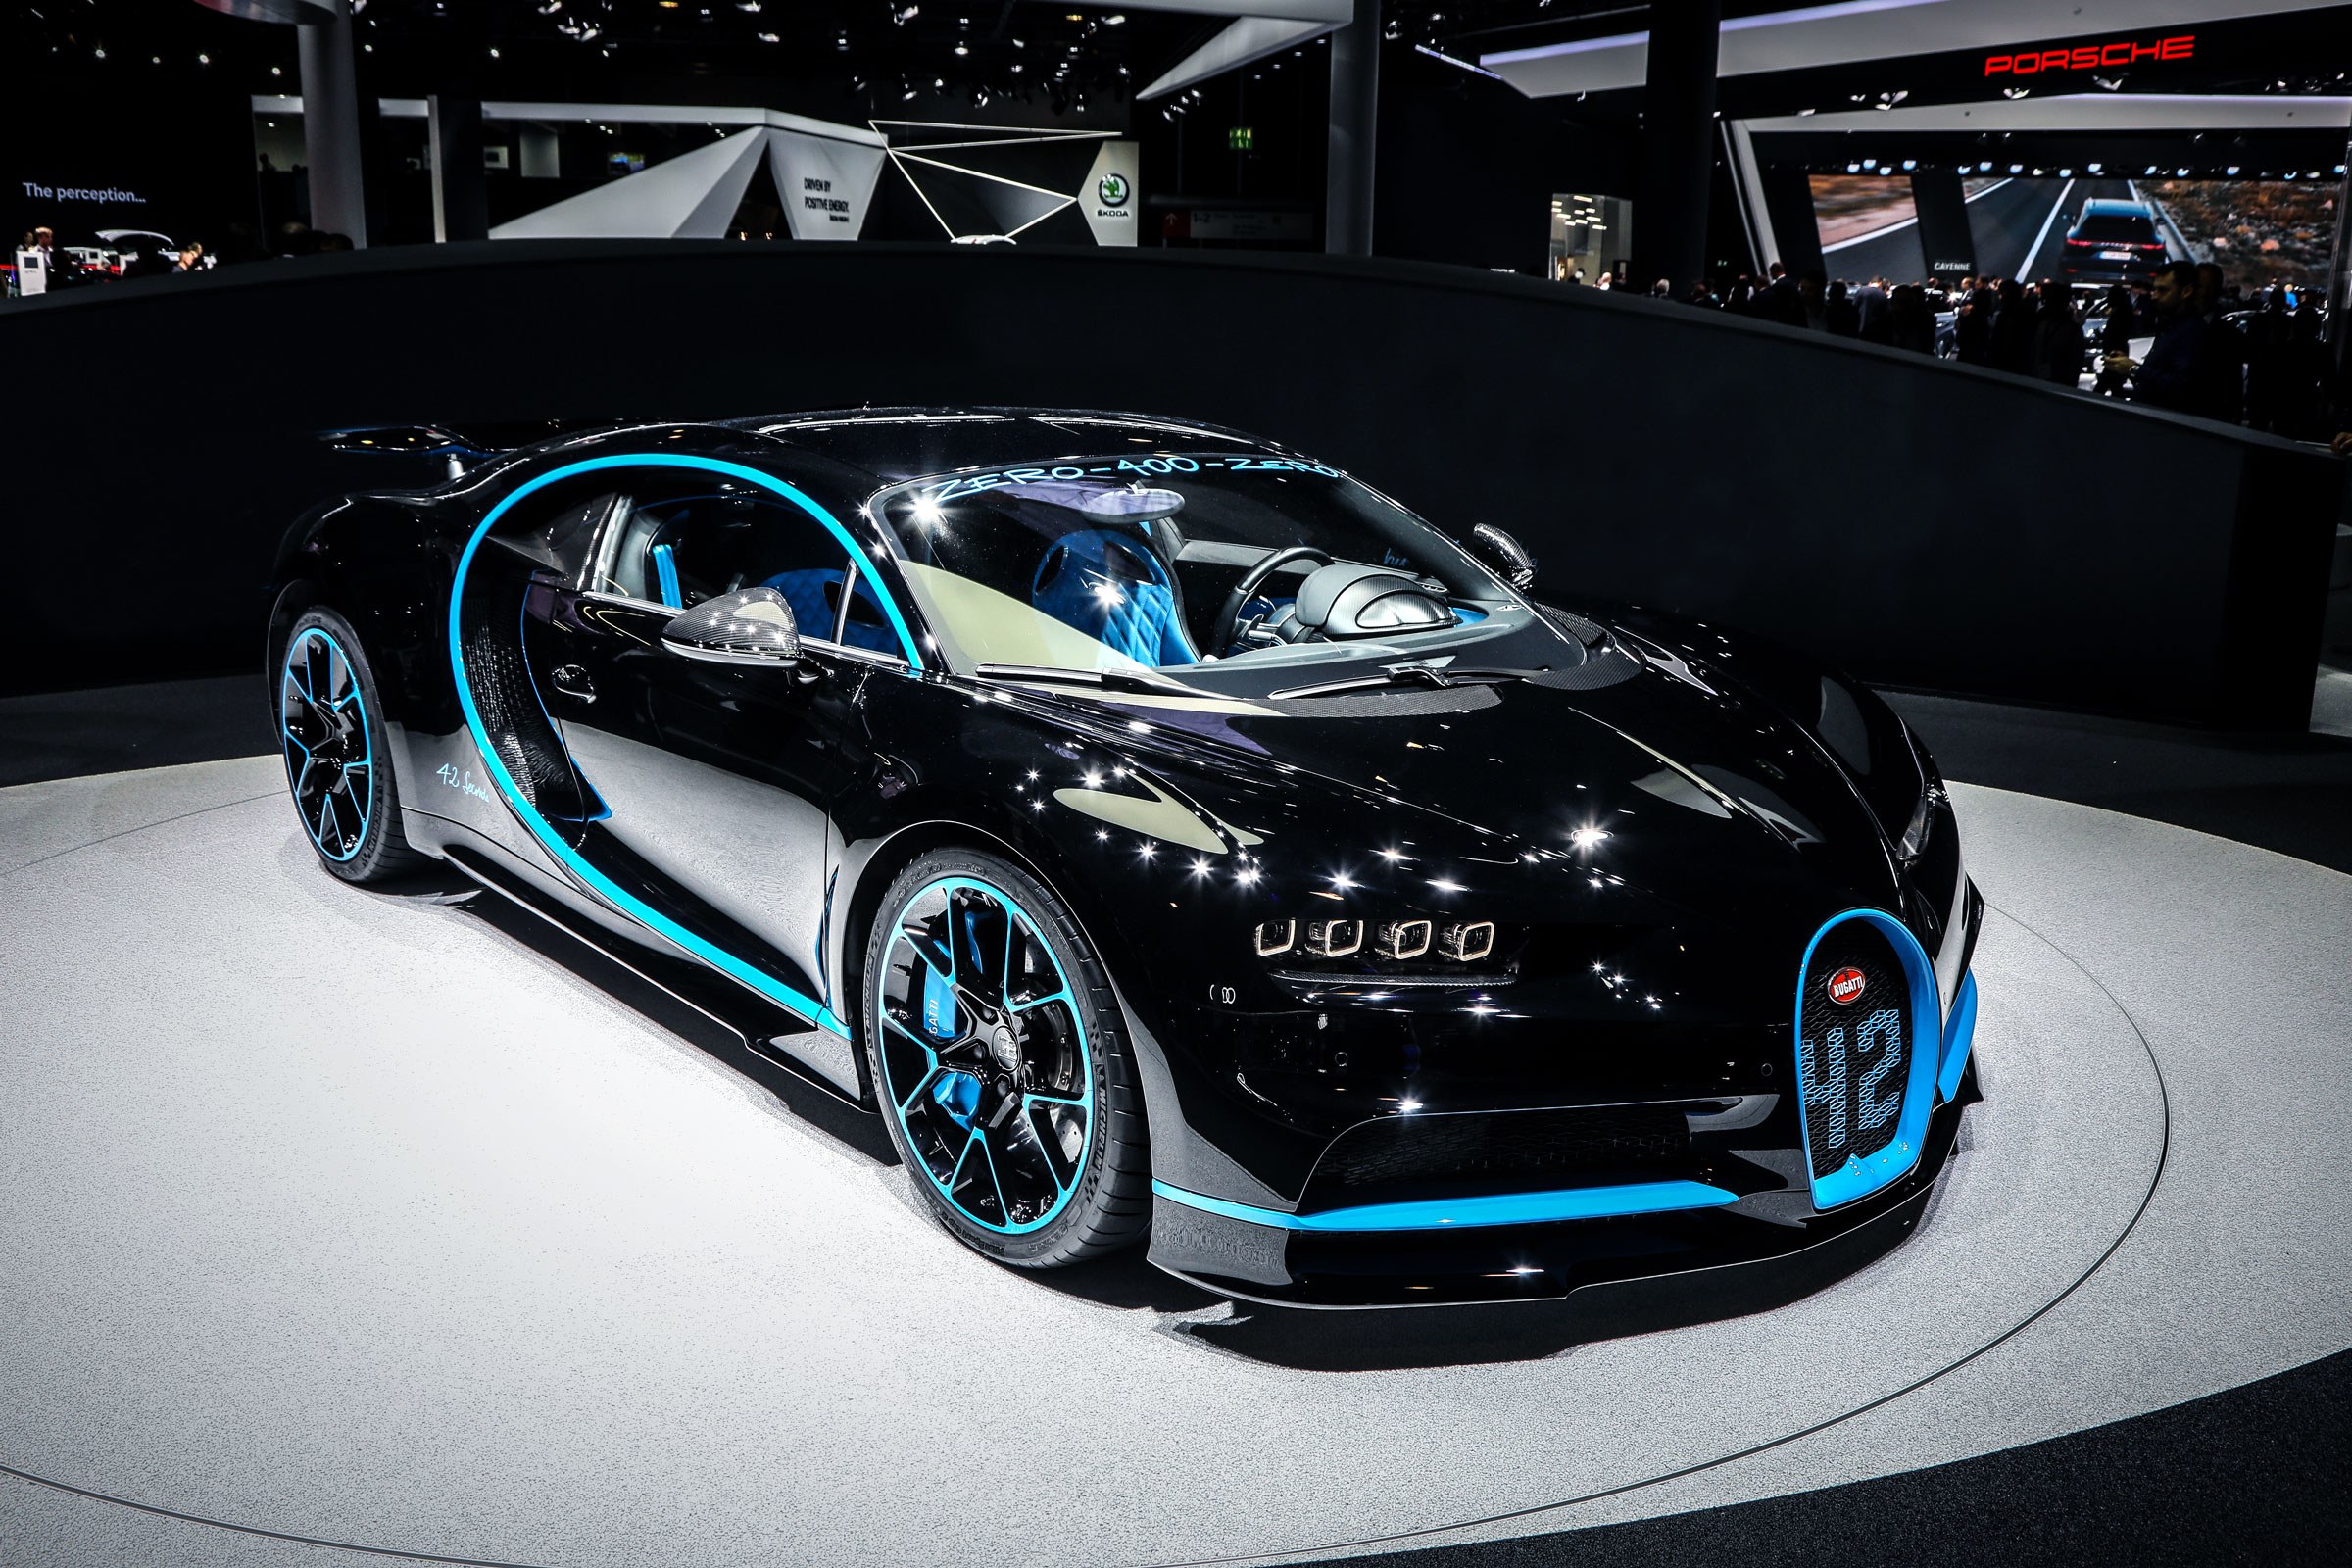 Let's Analyze the Ridiculous Physics of the Bugatti Chiron | WIRED